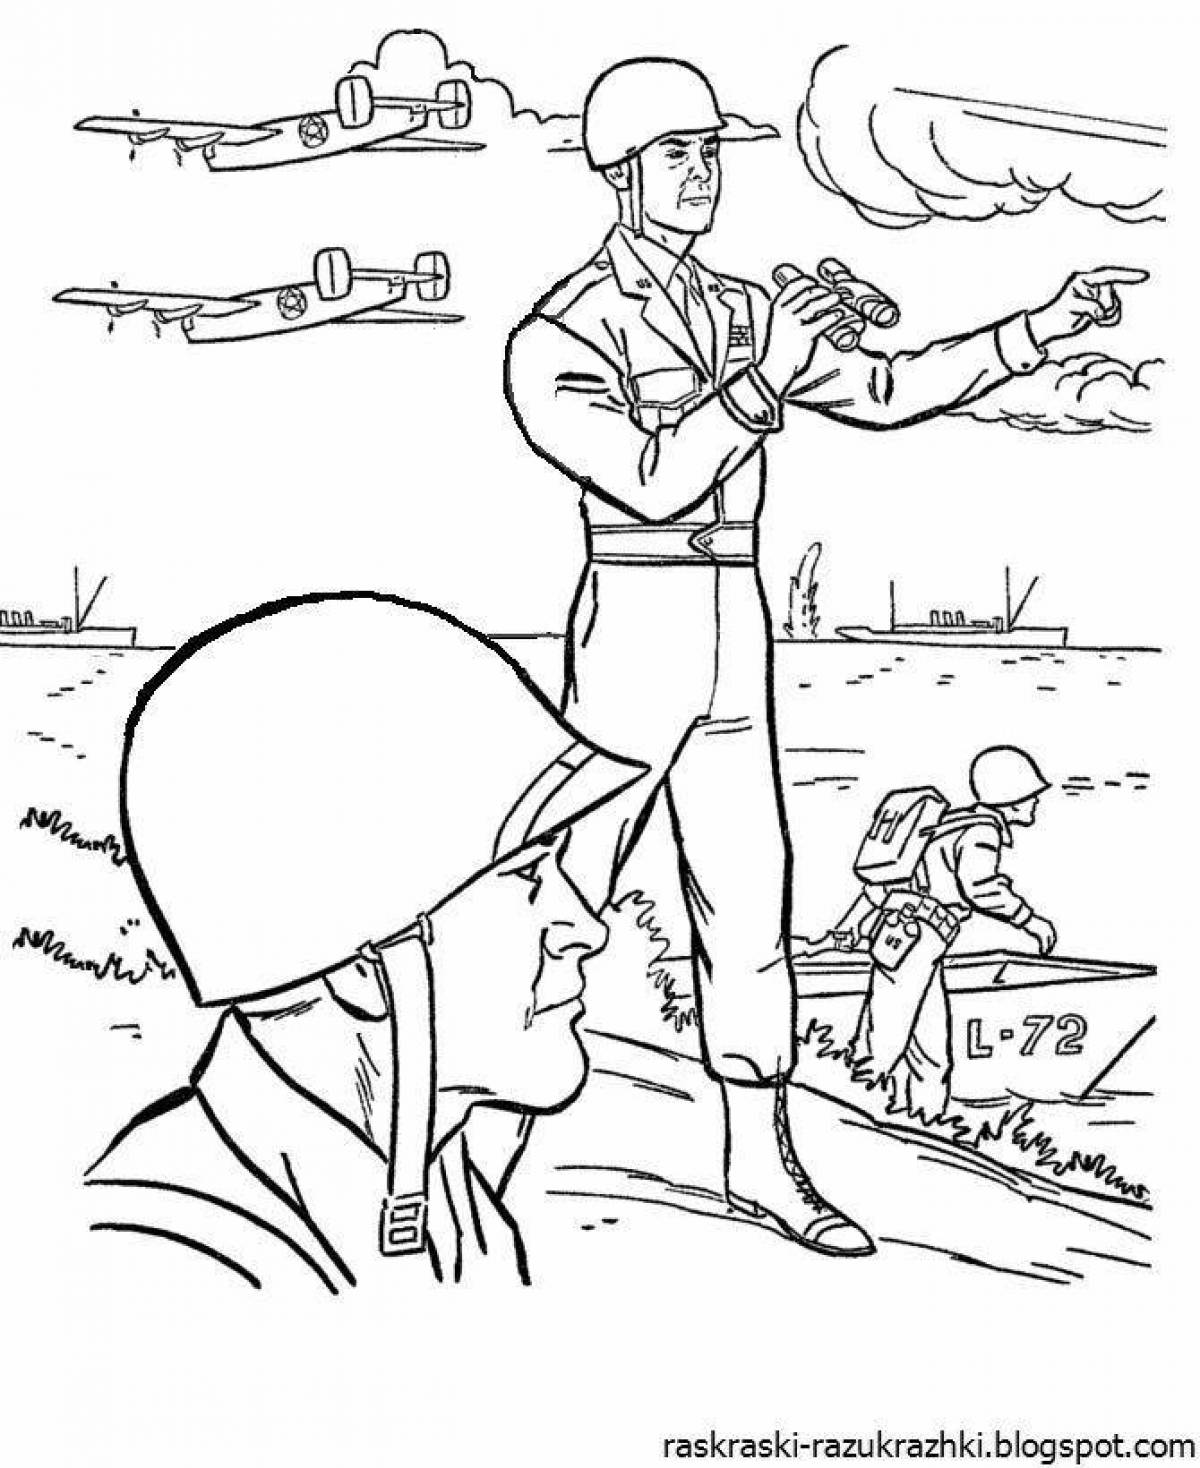 8th grade colorful military coloring book